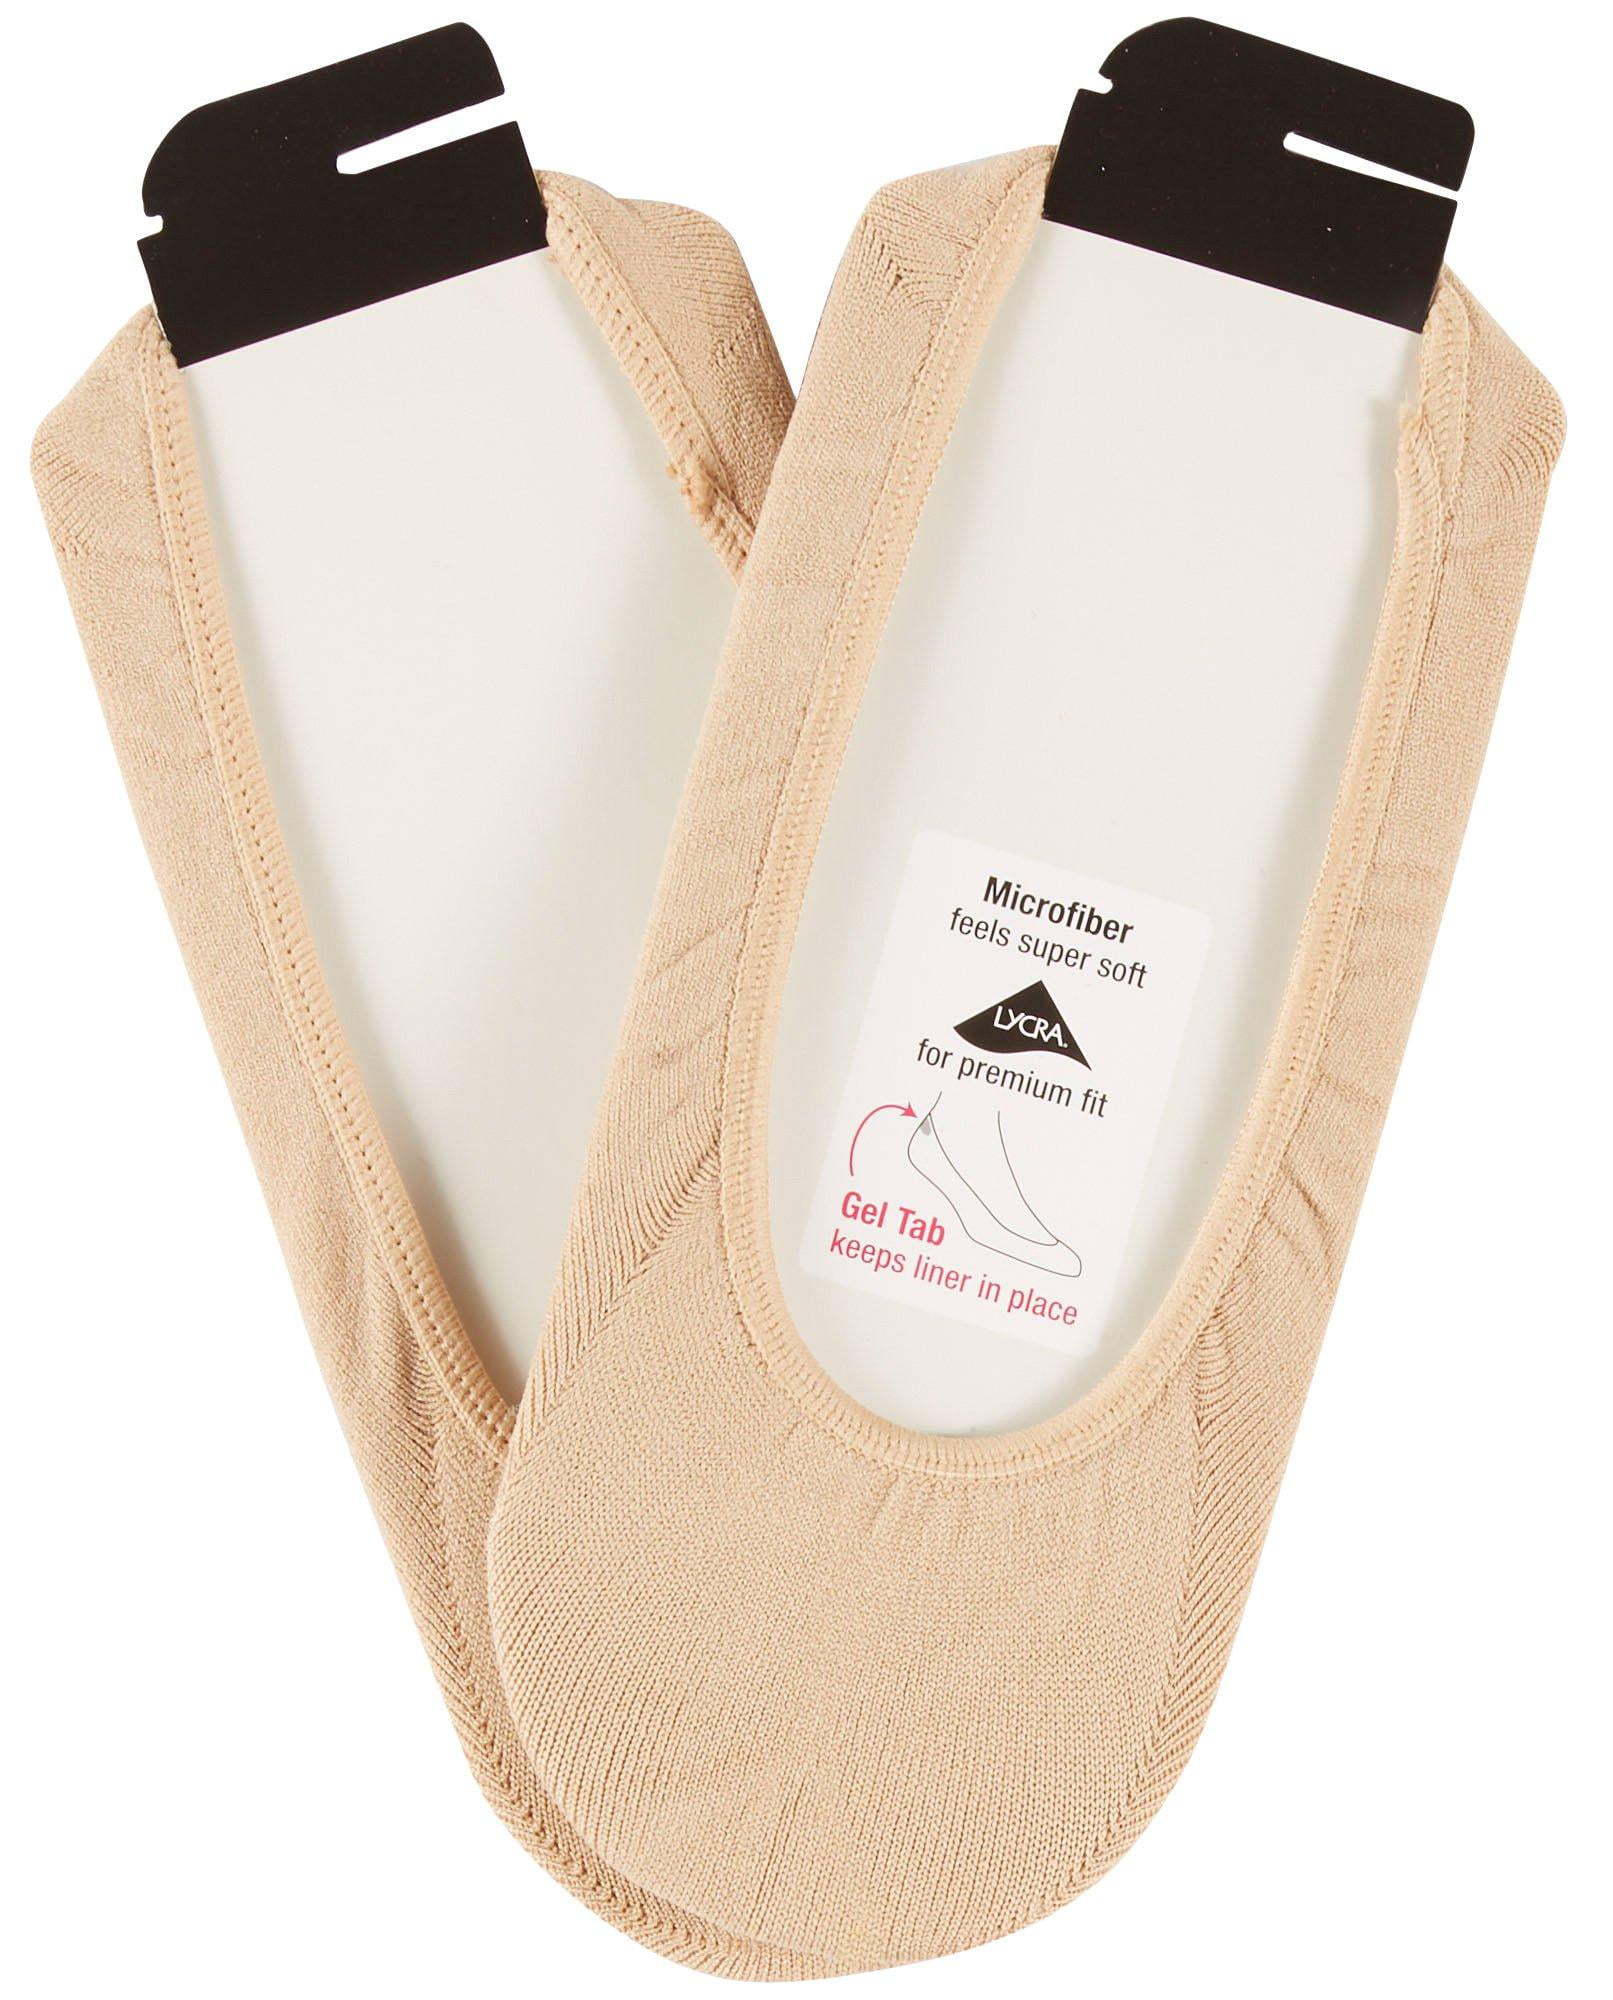 PEDS LADIES CUSHIONED PAD FOR SHOES INDULGE YOUR FEET CLEAR 2 PAIR 